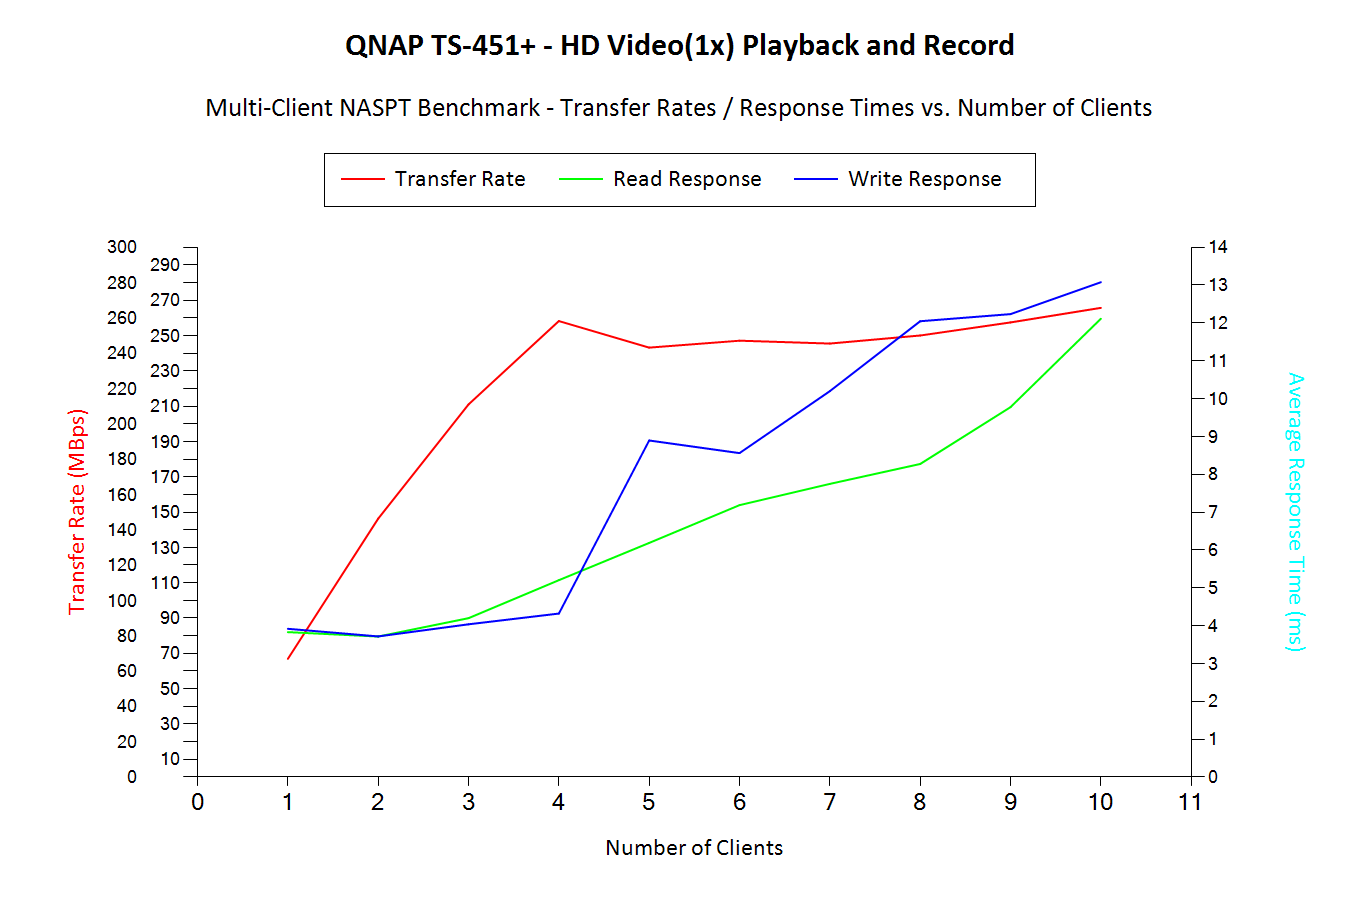 HD Video(1x) Playback and Record - Multi-Client Benchmark